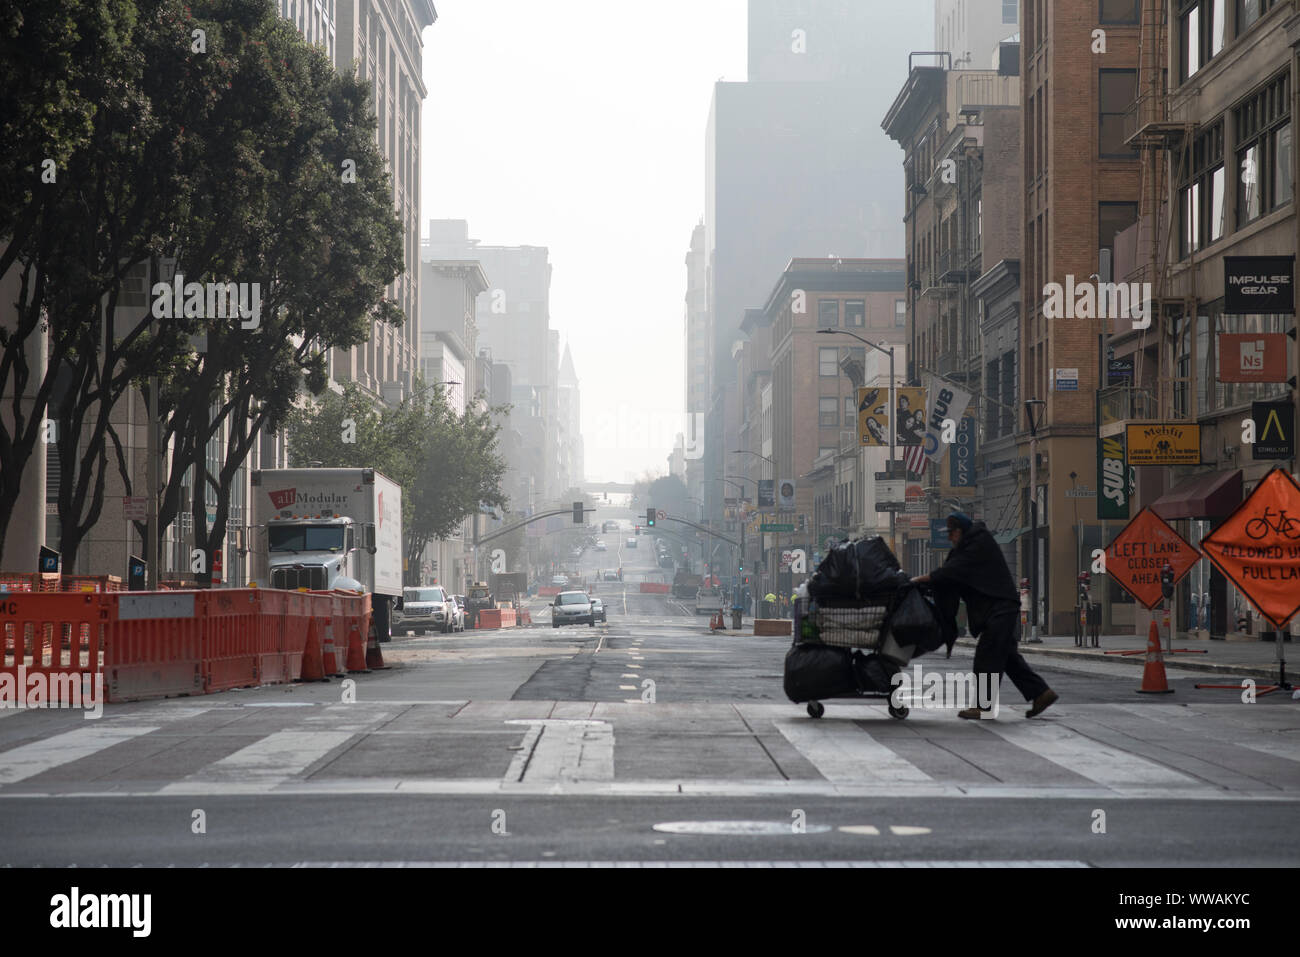 San Francisco, California - November 17, 2018: A homeless man pushing a shopping cart is silhouetted as he crosses 2nd Street at the corner of Market. Stock Photo